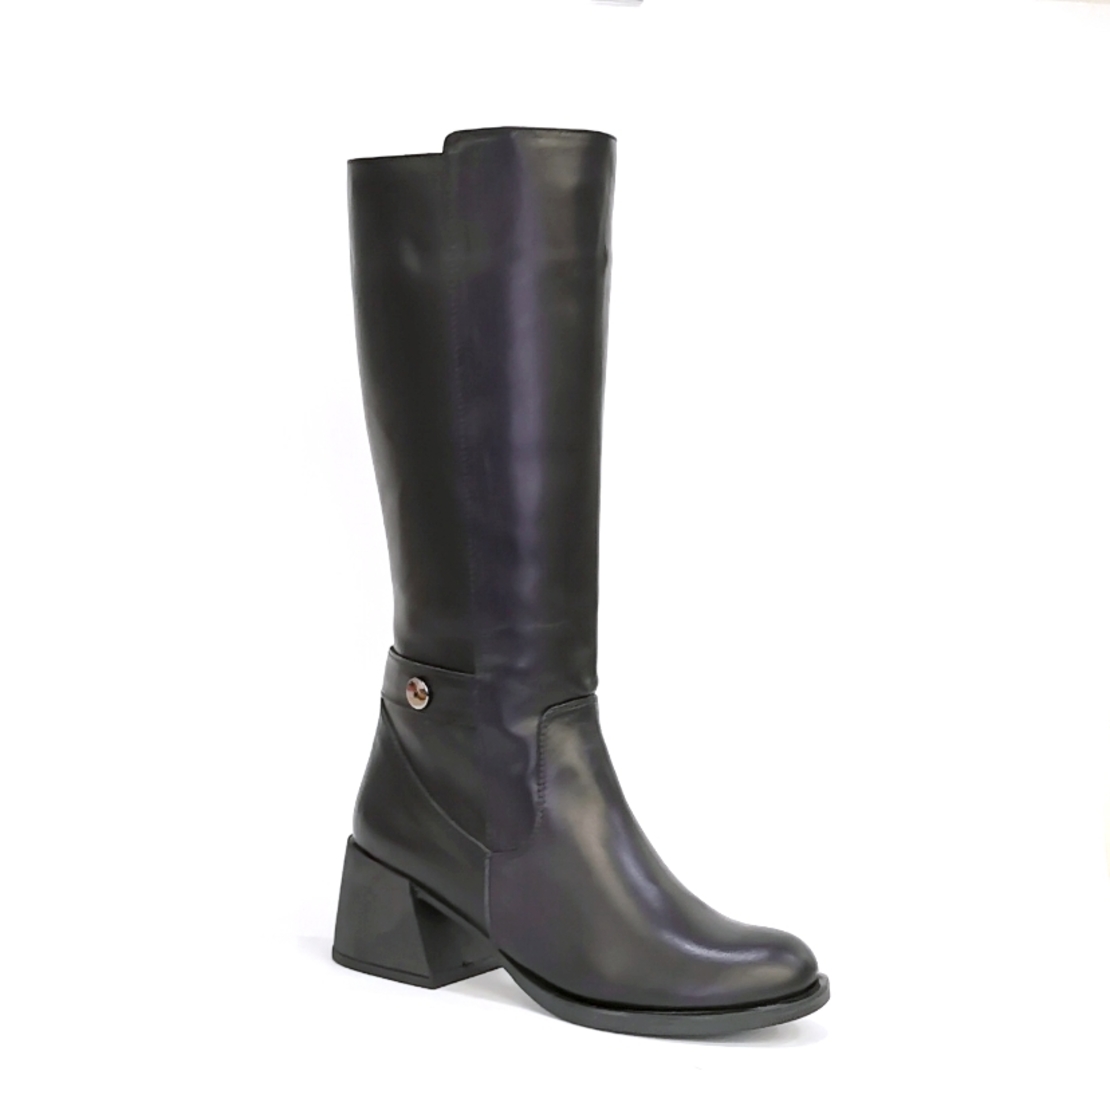 Women's elegant boots made of natural leather in black/7133